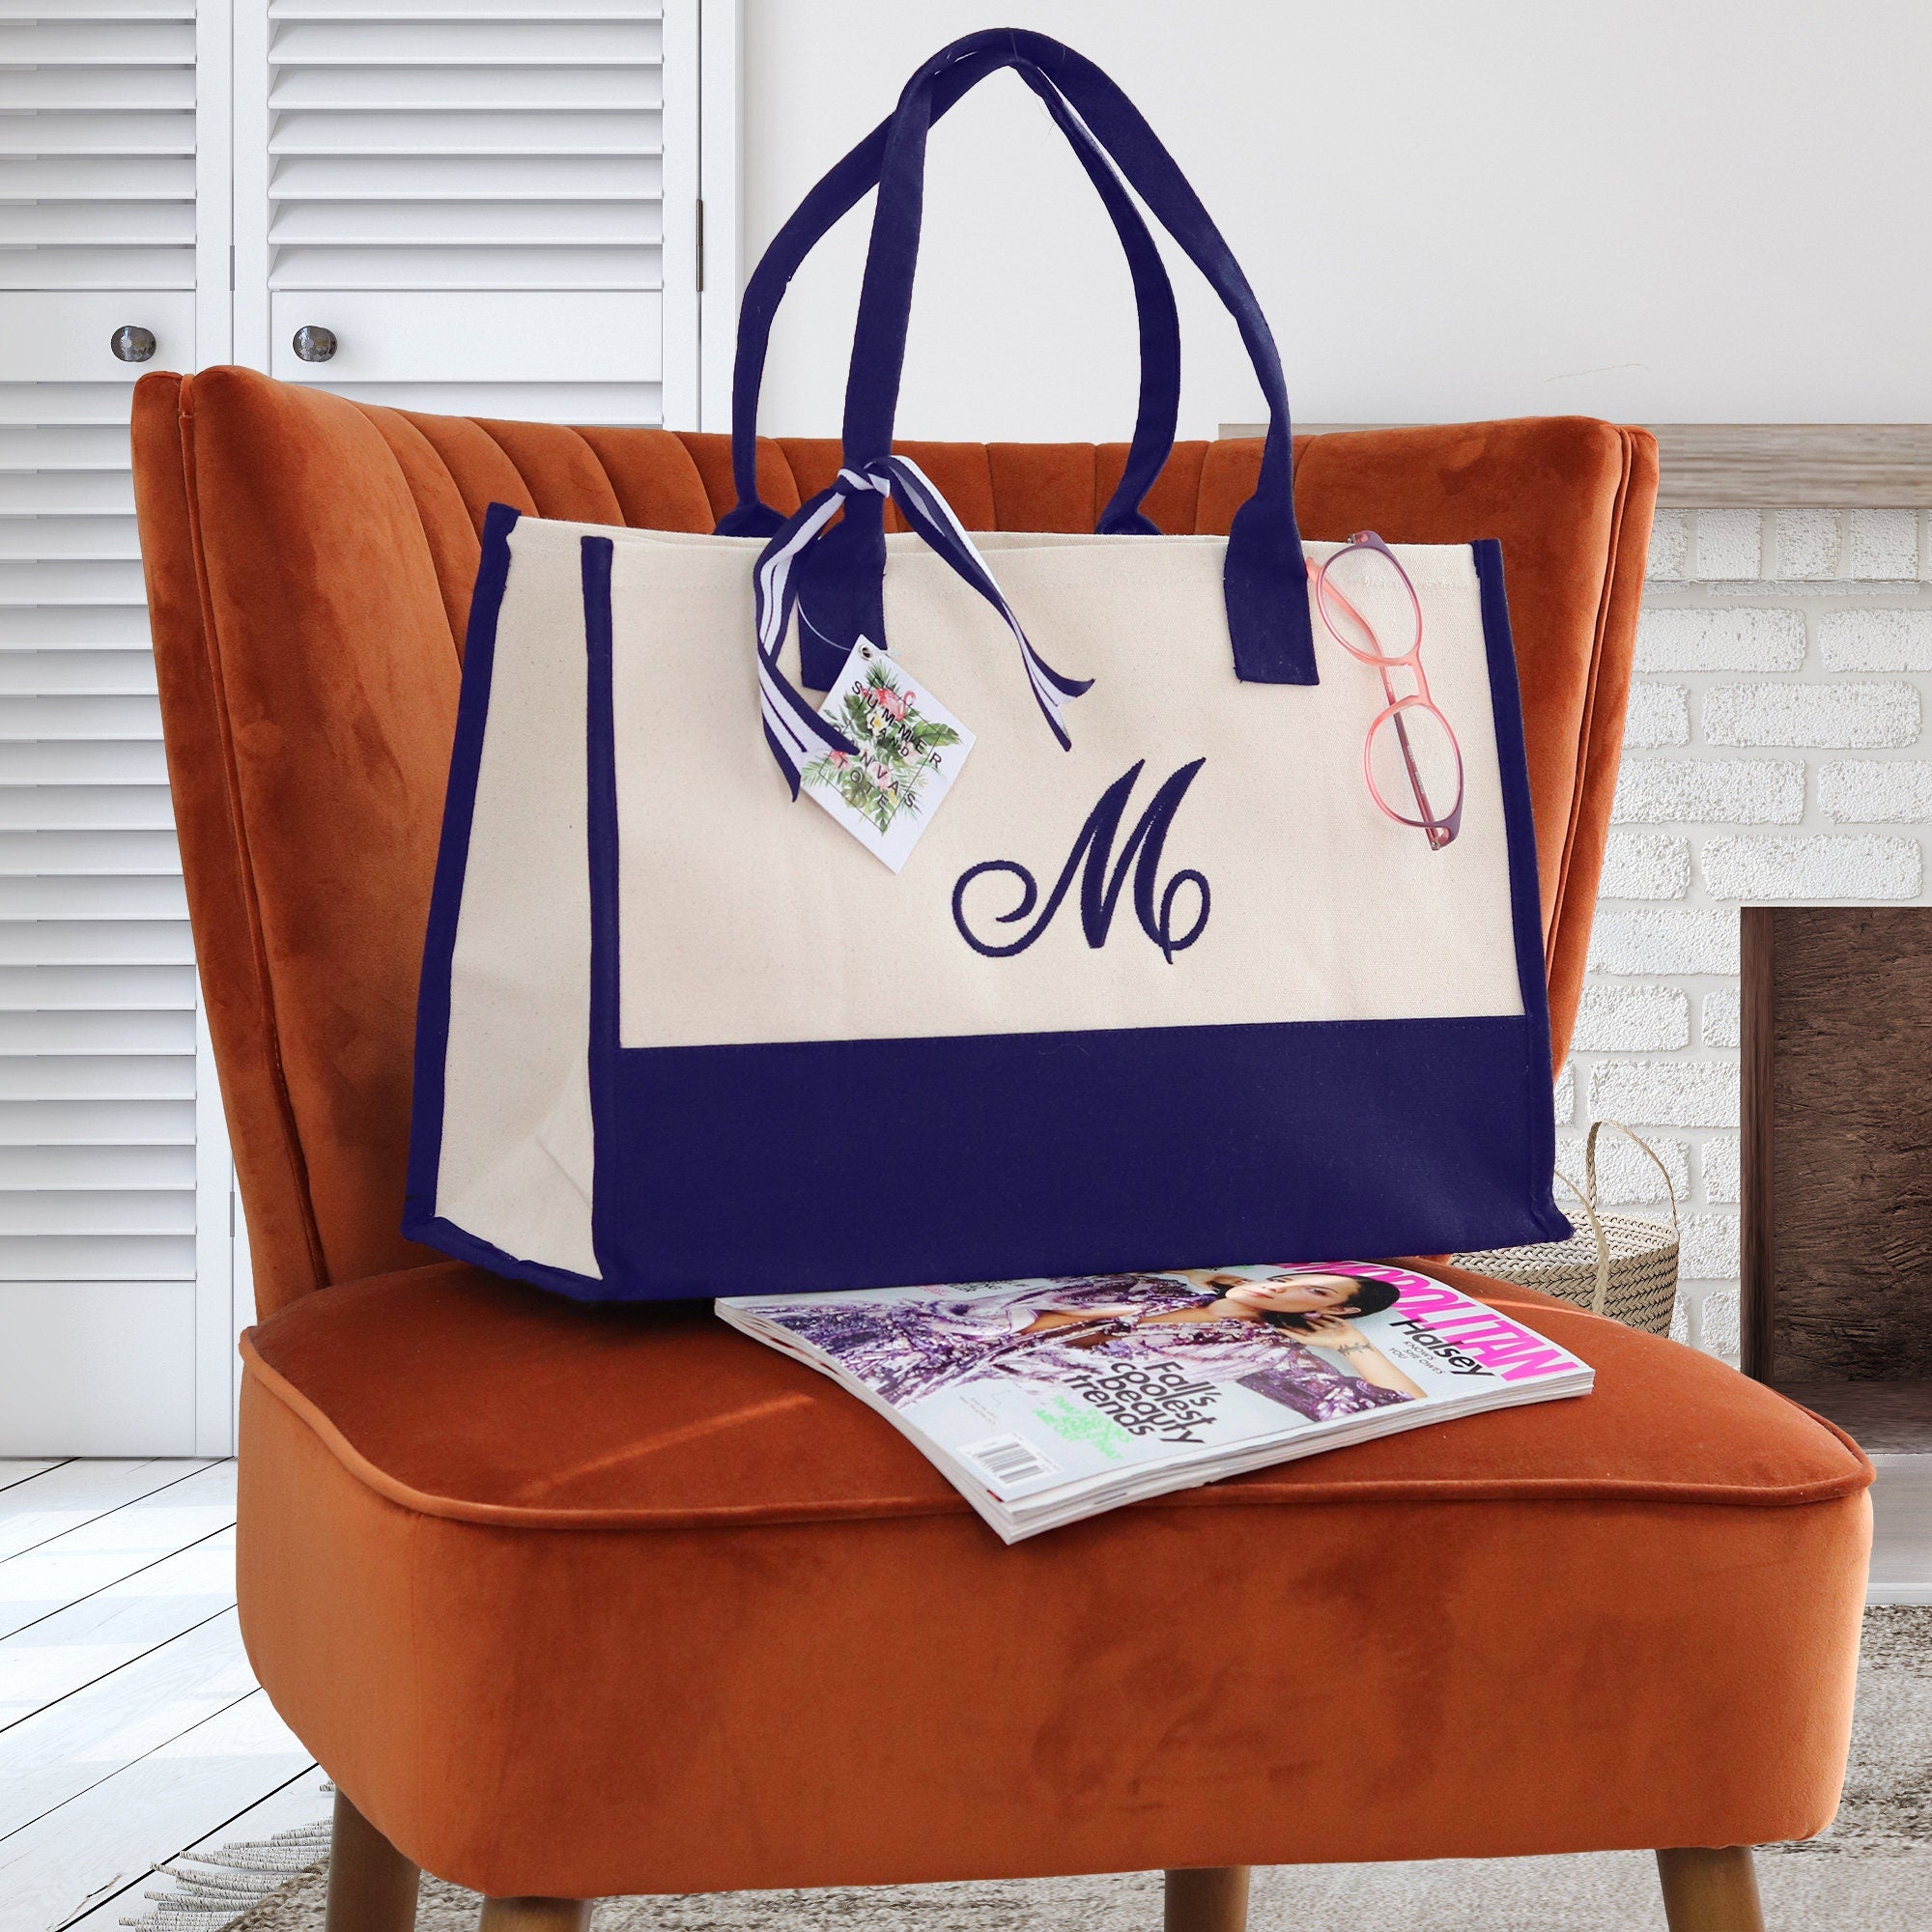 Tote bag aesthetic Embroidery Initial Monogram Large Tote Bag , 100% Cotton Canvas, Bridesmaid Bachelorette Gift Navy